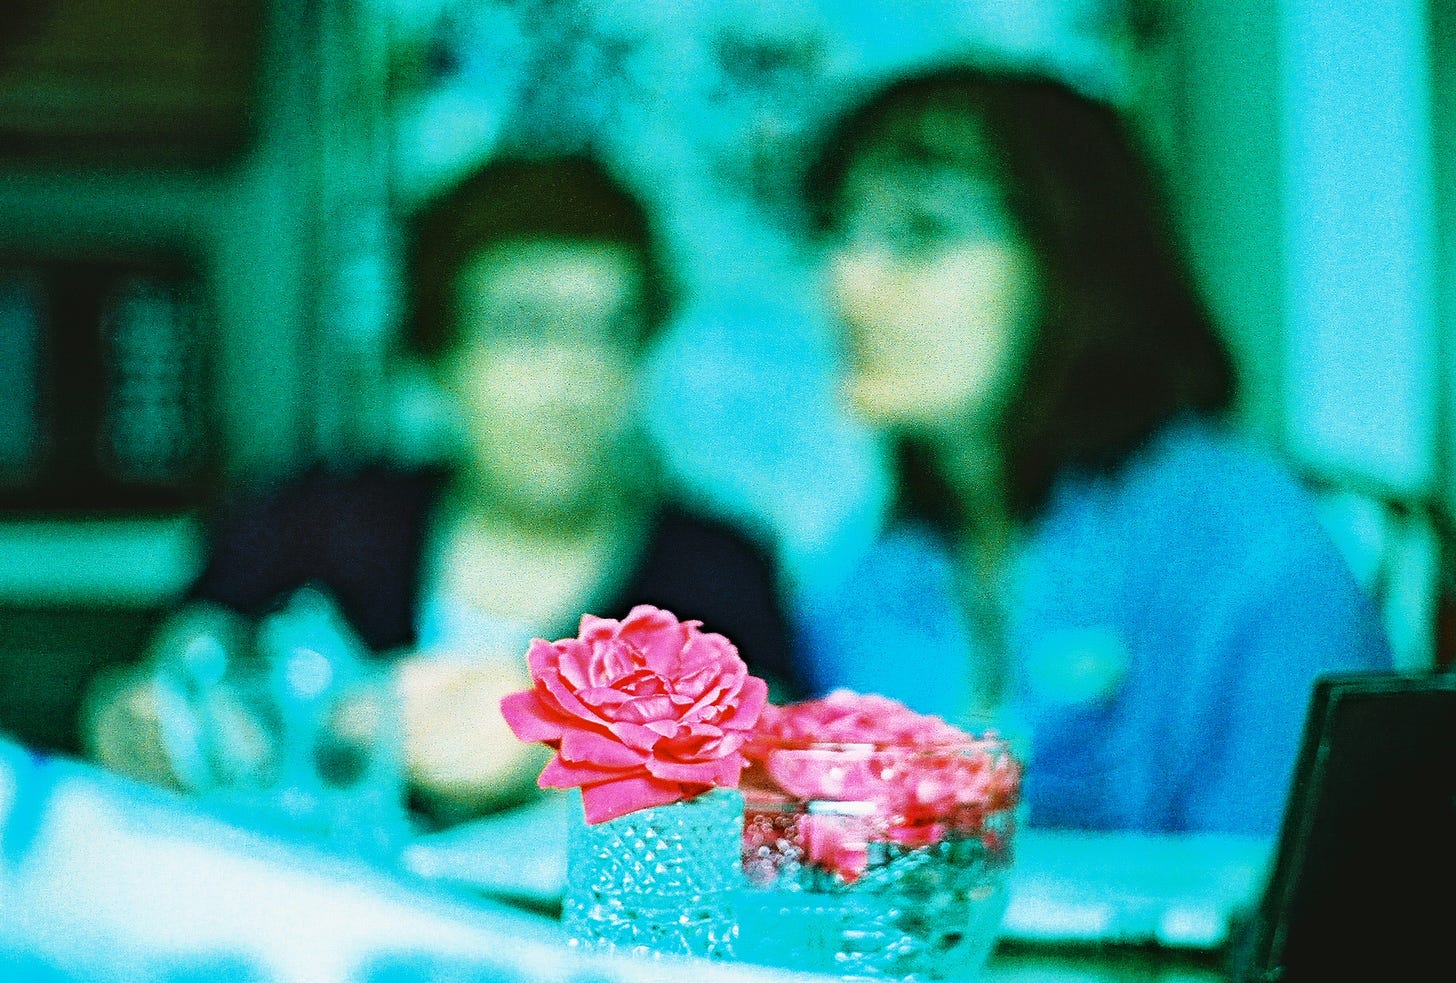 A close-up of two pink roses sitting in clear glasses, with people talking way out of focus in the background.